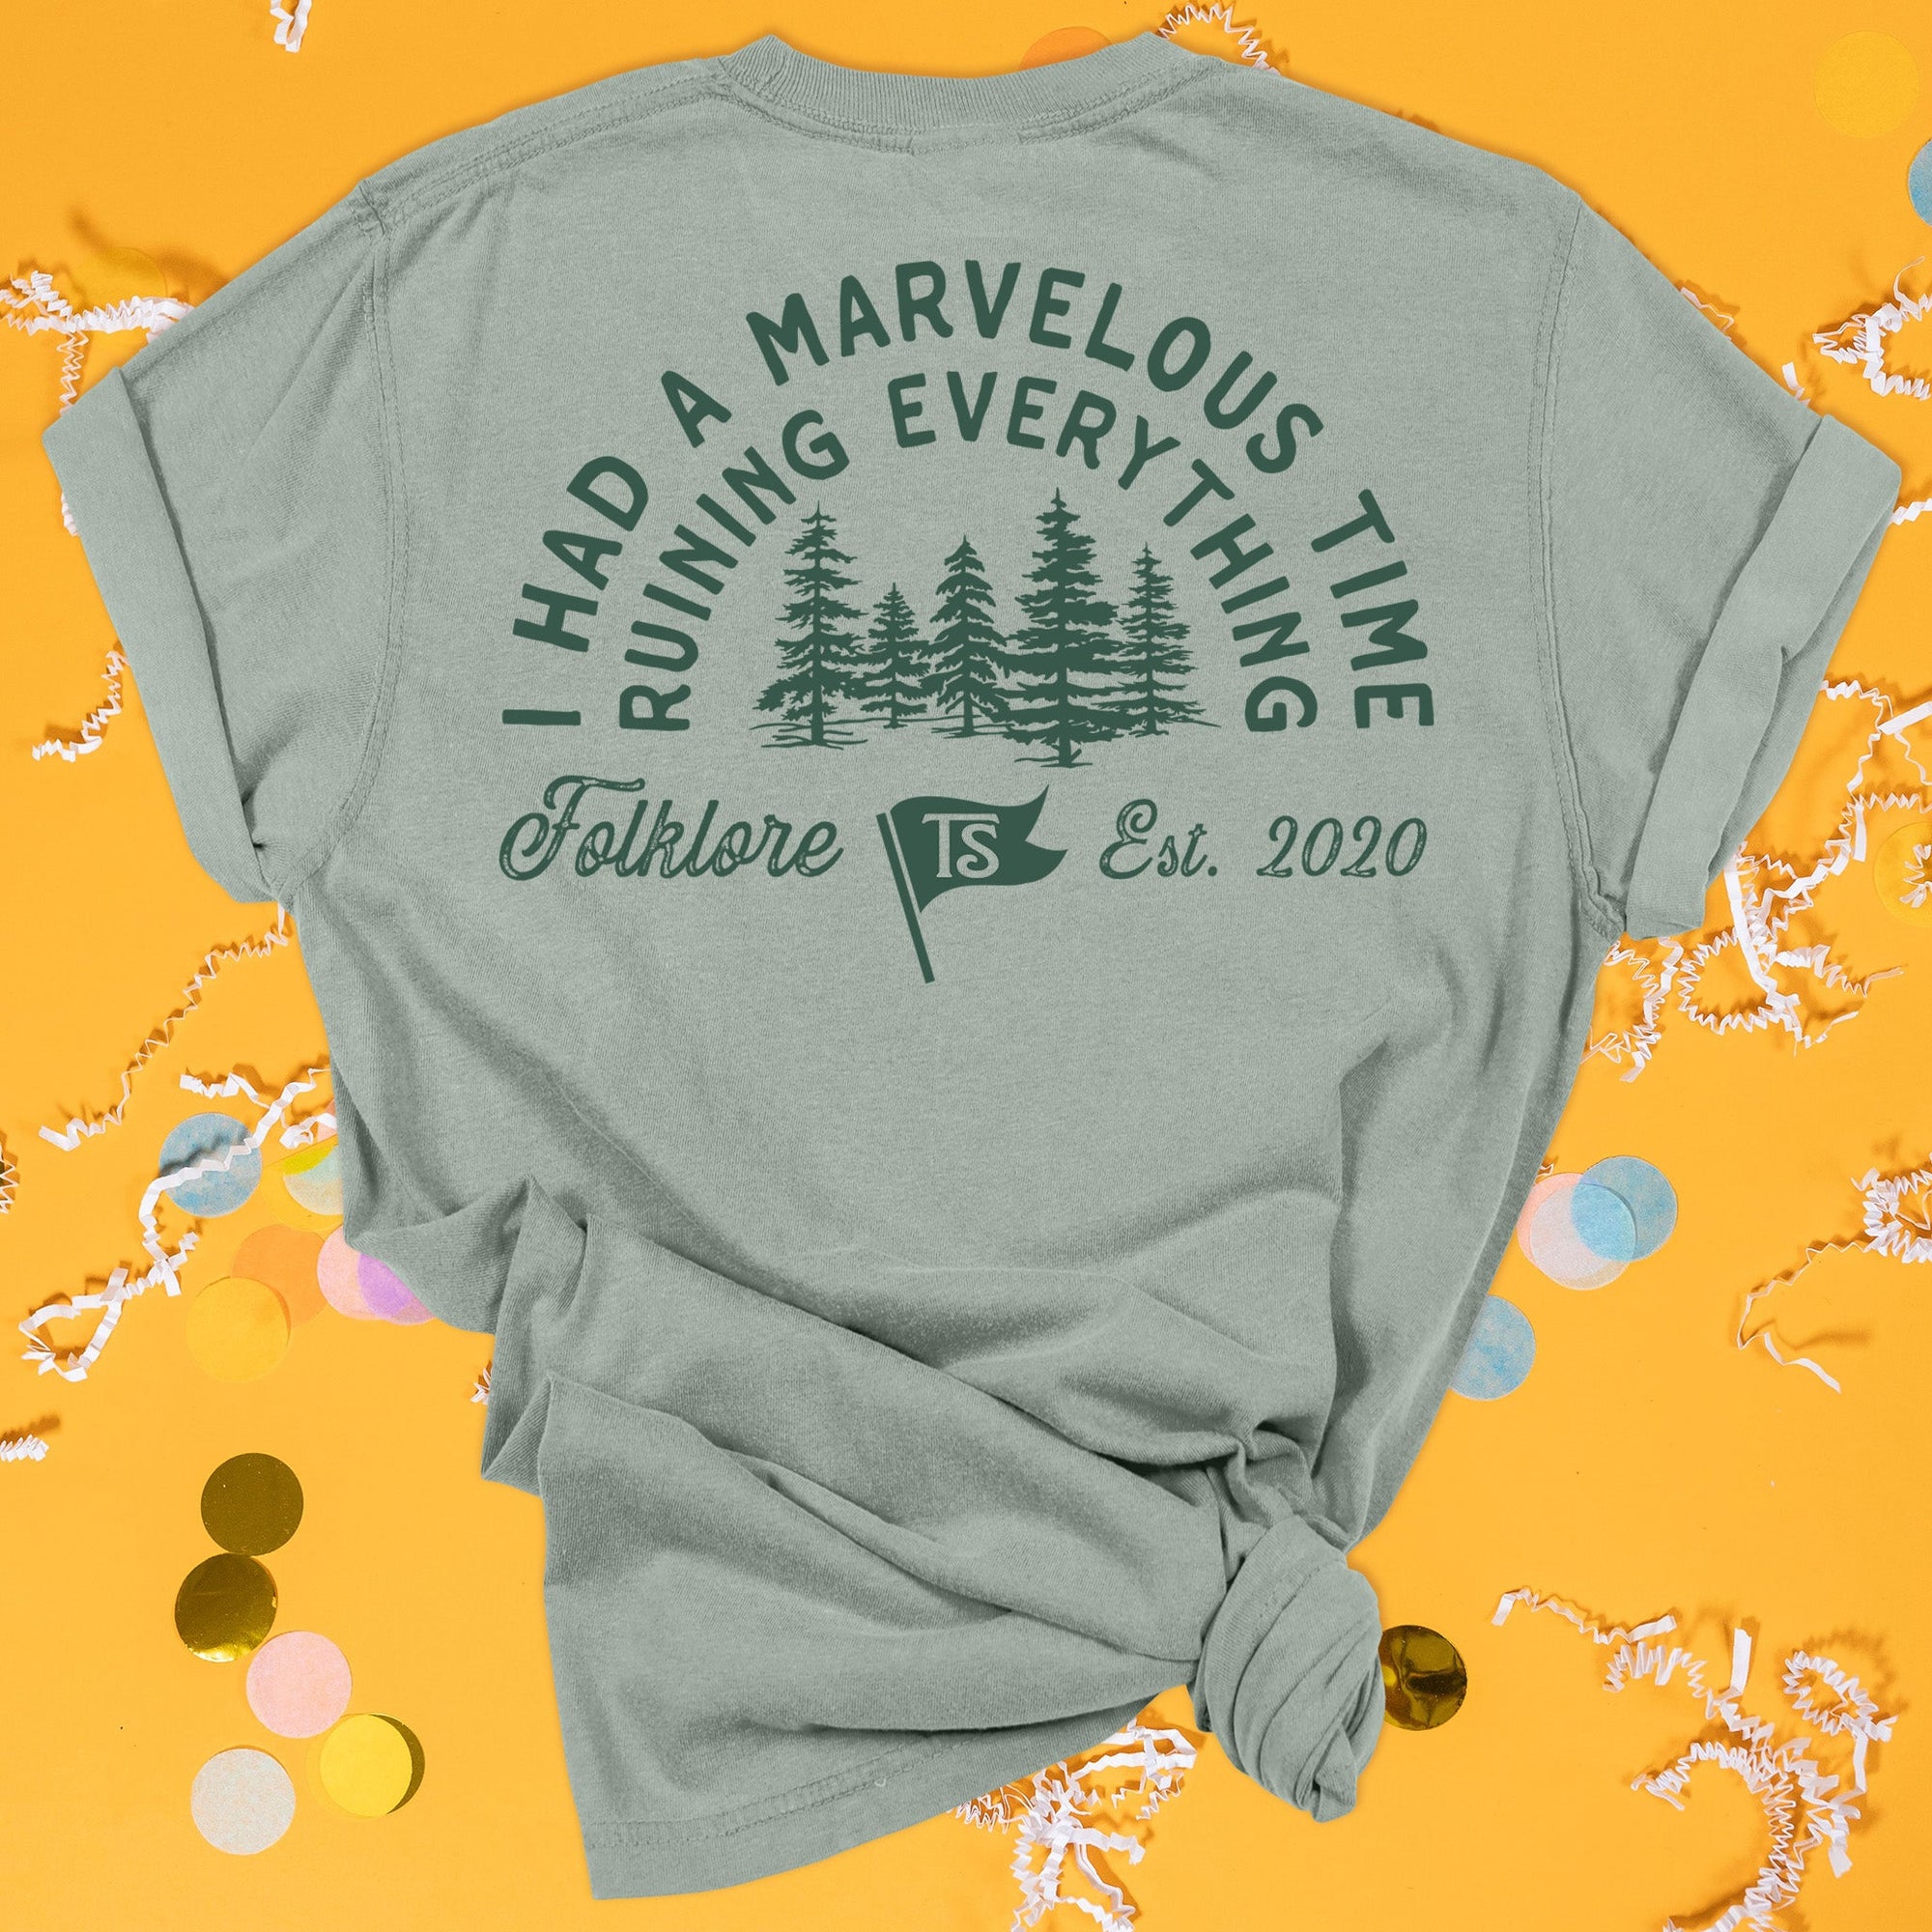 On a sunny mustard background sits the back of a t-shirt with white crinkle and big, colorful confetti scattered around. This Taylor Swift Inspired Reputation tee is dark sage with dark green lettering and an illustration of forest trees. It says "I HAD A MARVELOUS TIME RUINING EVERYTHING" in all caps and "Folklore Est. 2020" in script lettering. There is a flag with "TS" in it.